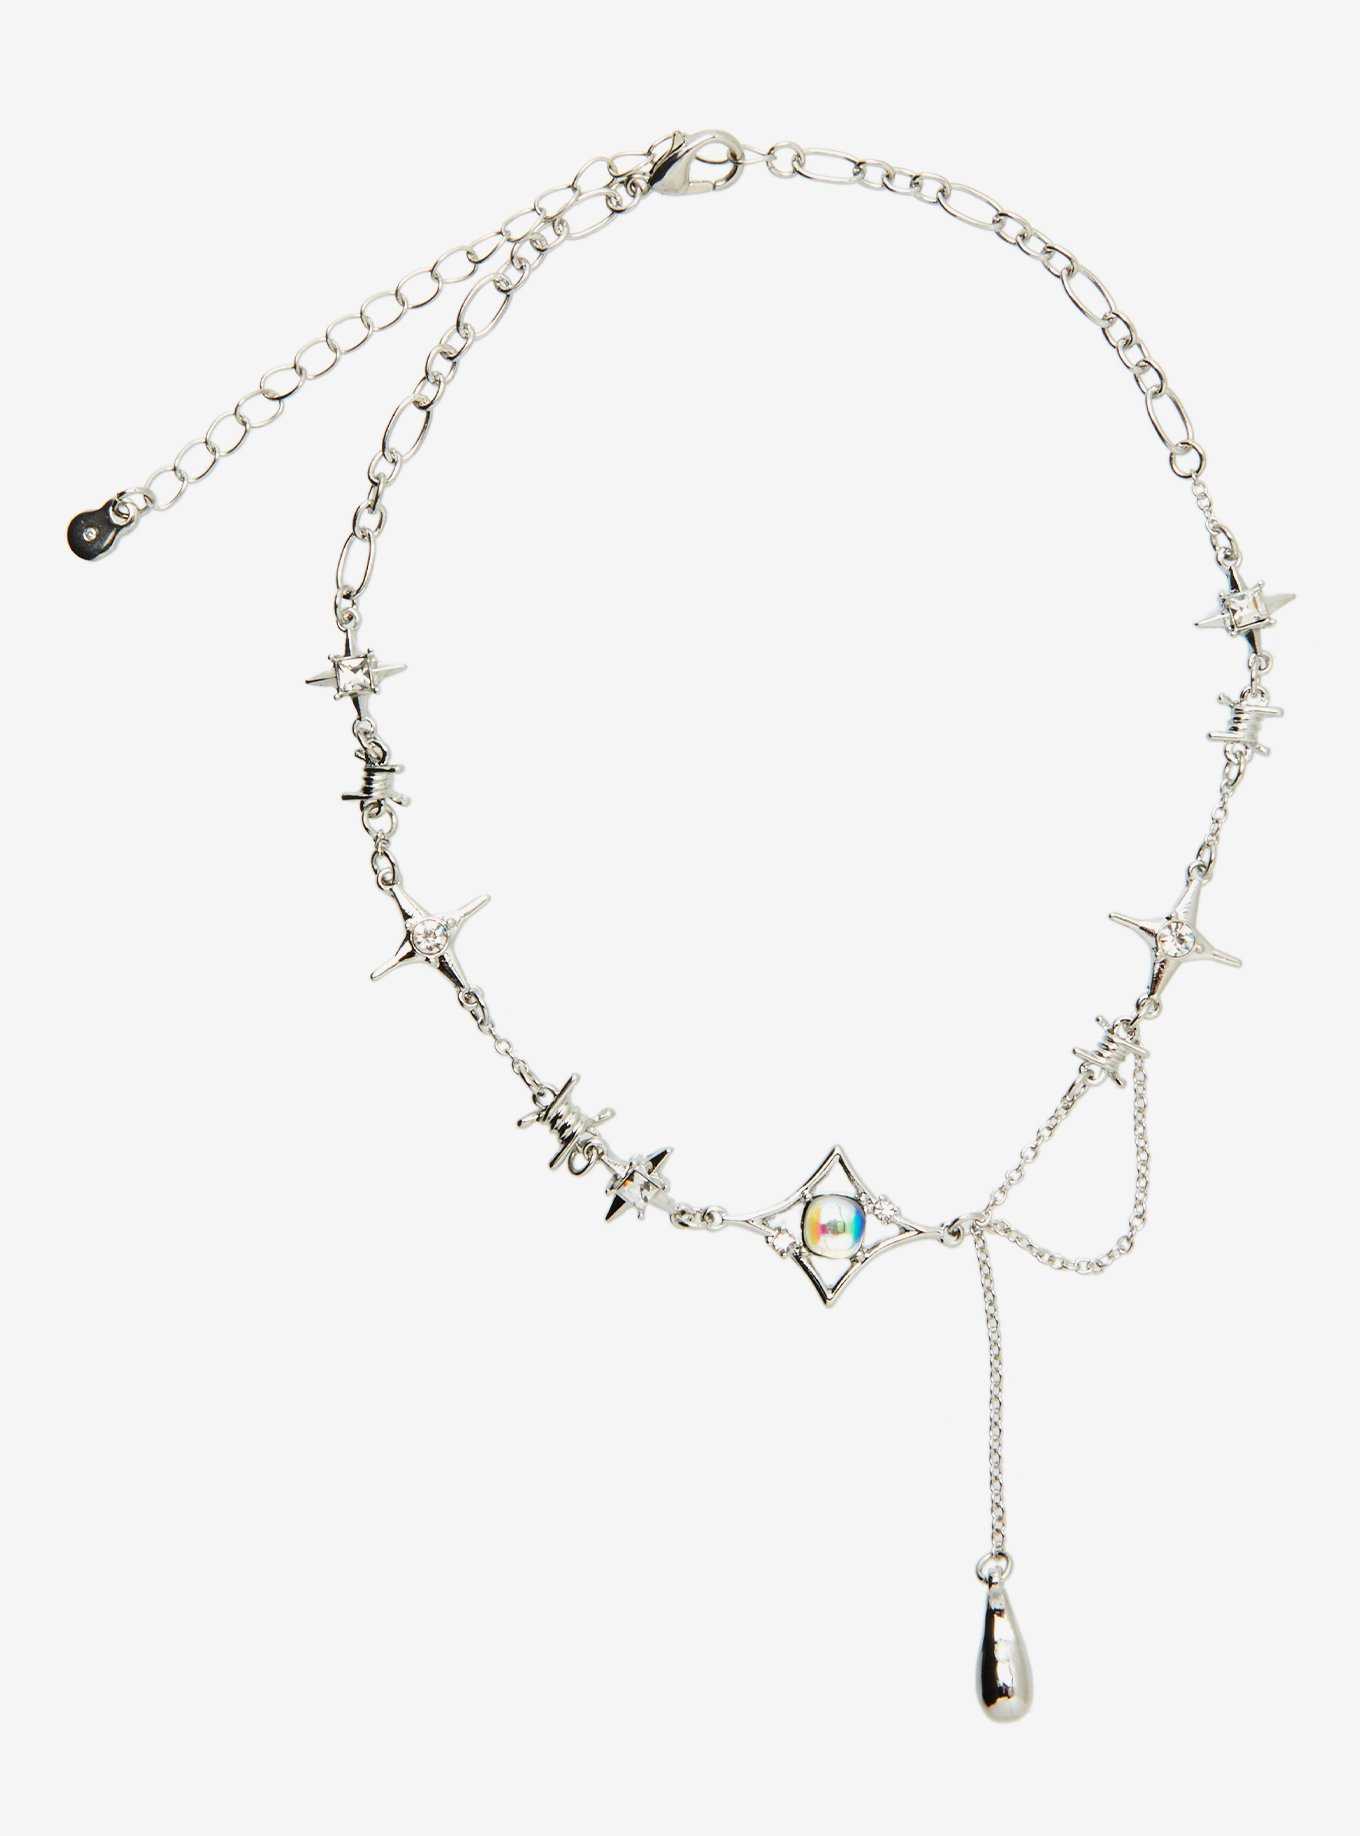 Are Choker Necklaces Still Popular? – Robinson's Jewelers